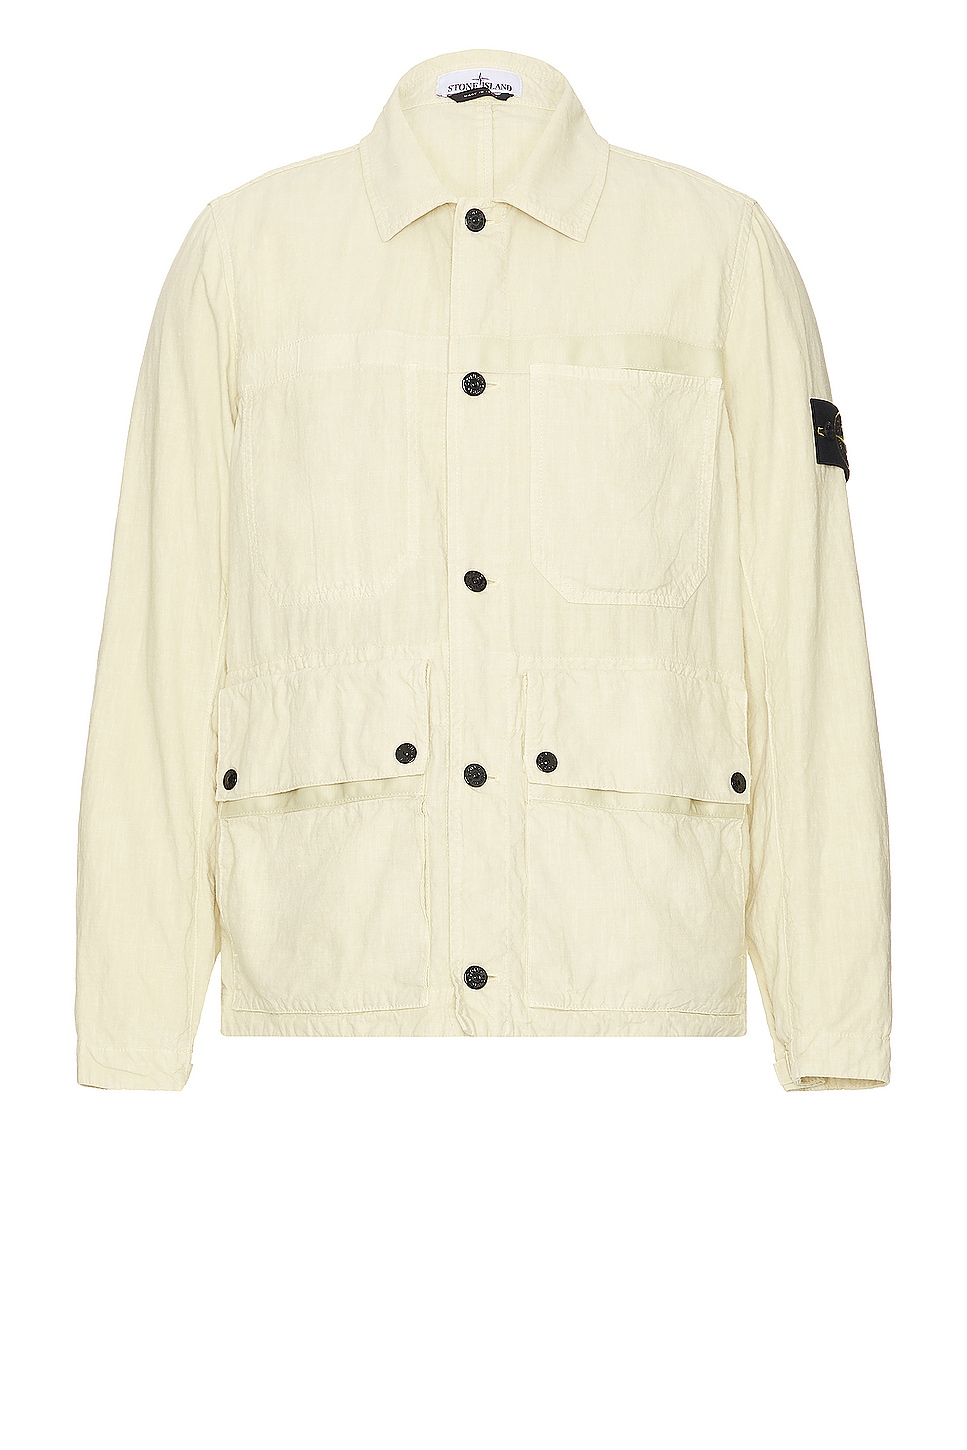 Image 1 of Stone Island Jacket in Natural Beige